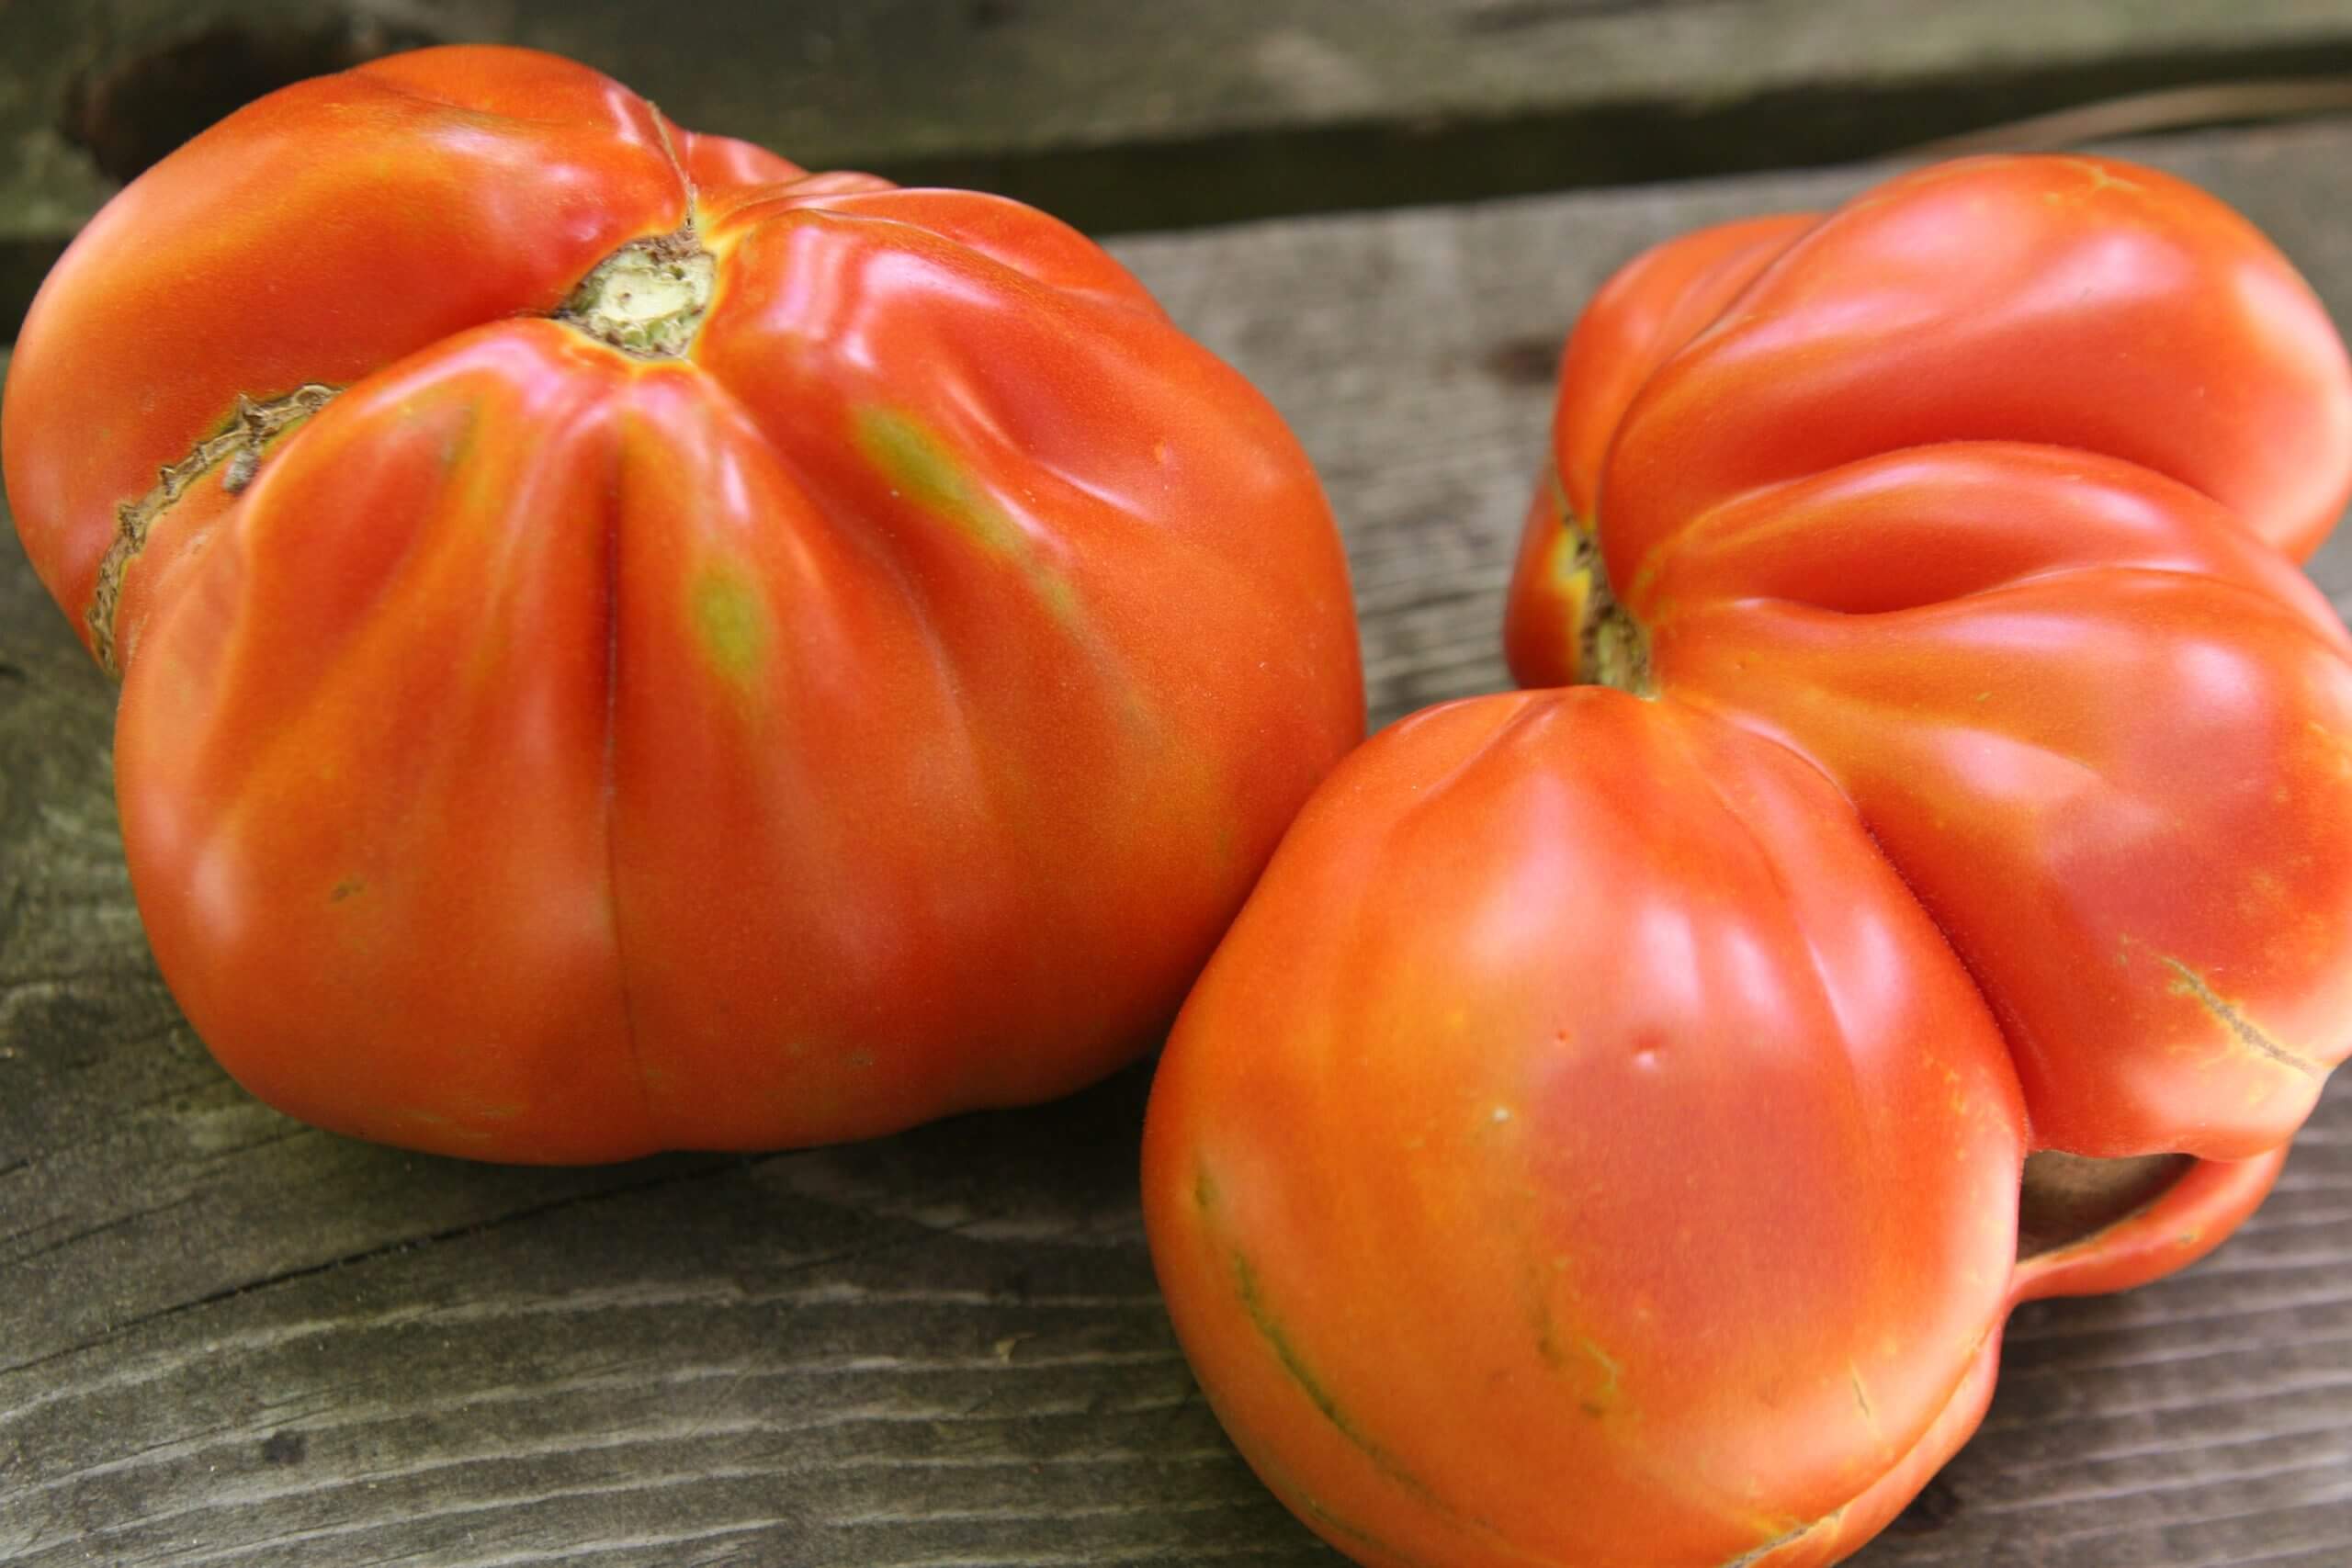 'Pomodoro' is a fantastic all-purpose tomato for fresh eating and cooking.